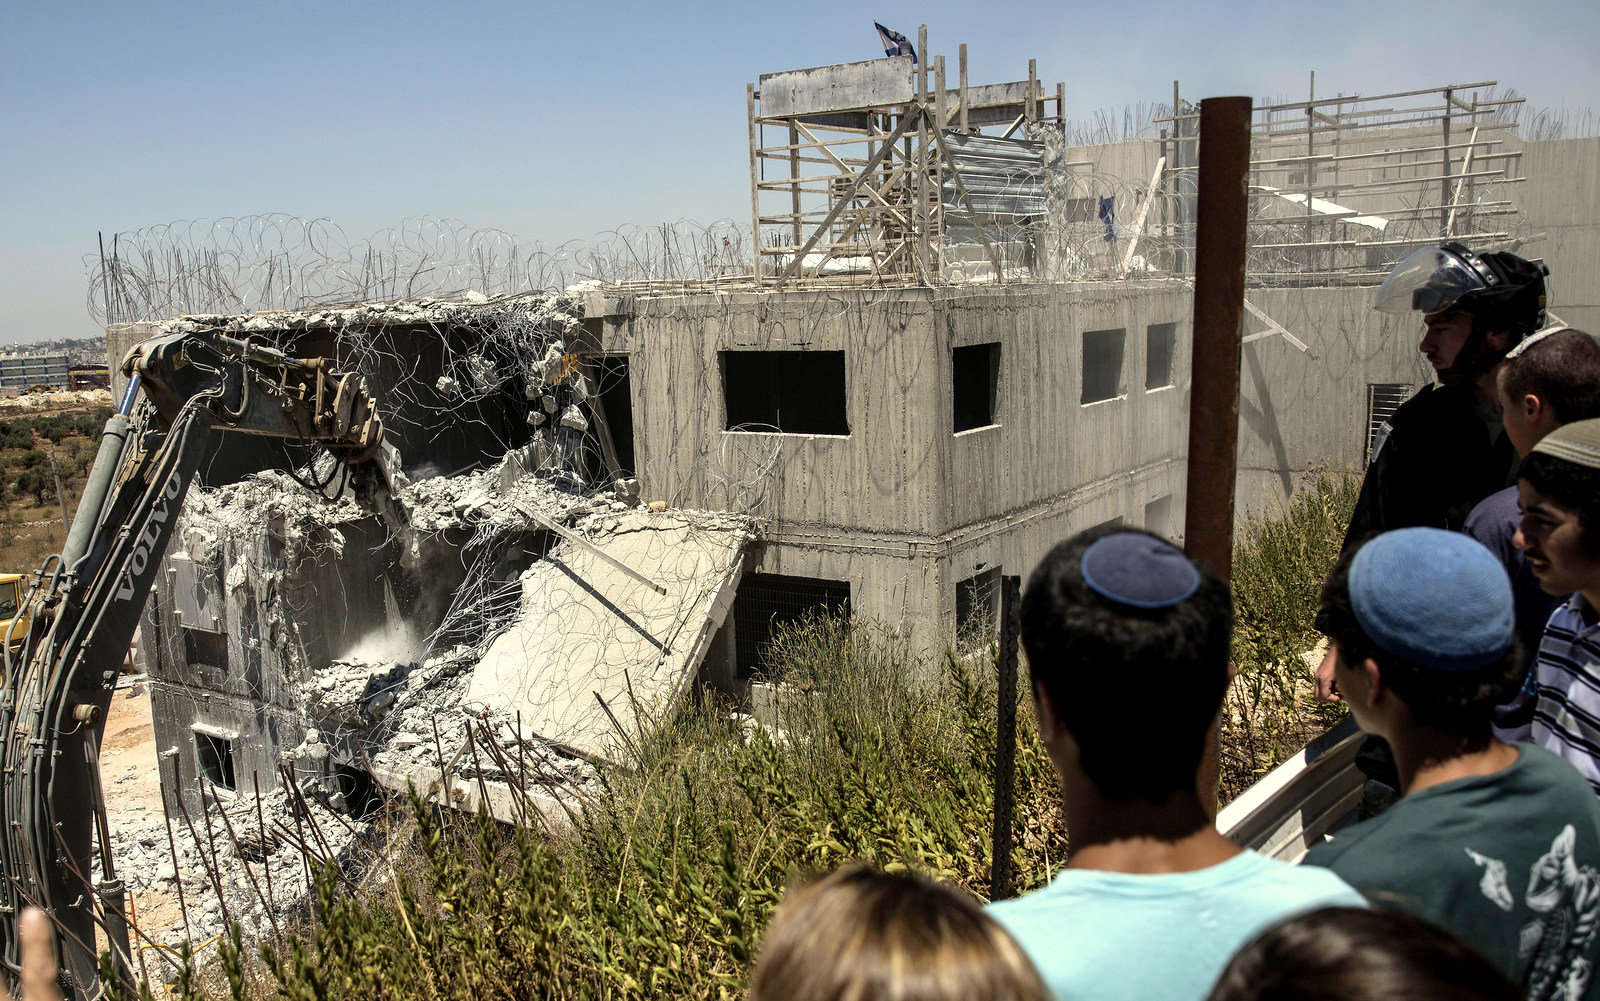 Young Israeli settlers watch the demolition of a building at the Jewish settlement of Beit El, near the West Bank town of Ramallah, Wednesday, July 29, 2015. Israeli bulldozers began demolishing a contested housing complex in a West Bank settlement on Wednesday as the prime minister’s office announced the “immediate construction” of some 300 new units at another location in the same settlement and advanced plans for about 500 new units in east Jerusalem. (AP Photo/Tsafrir Abayov)